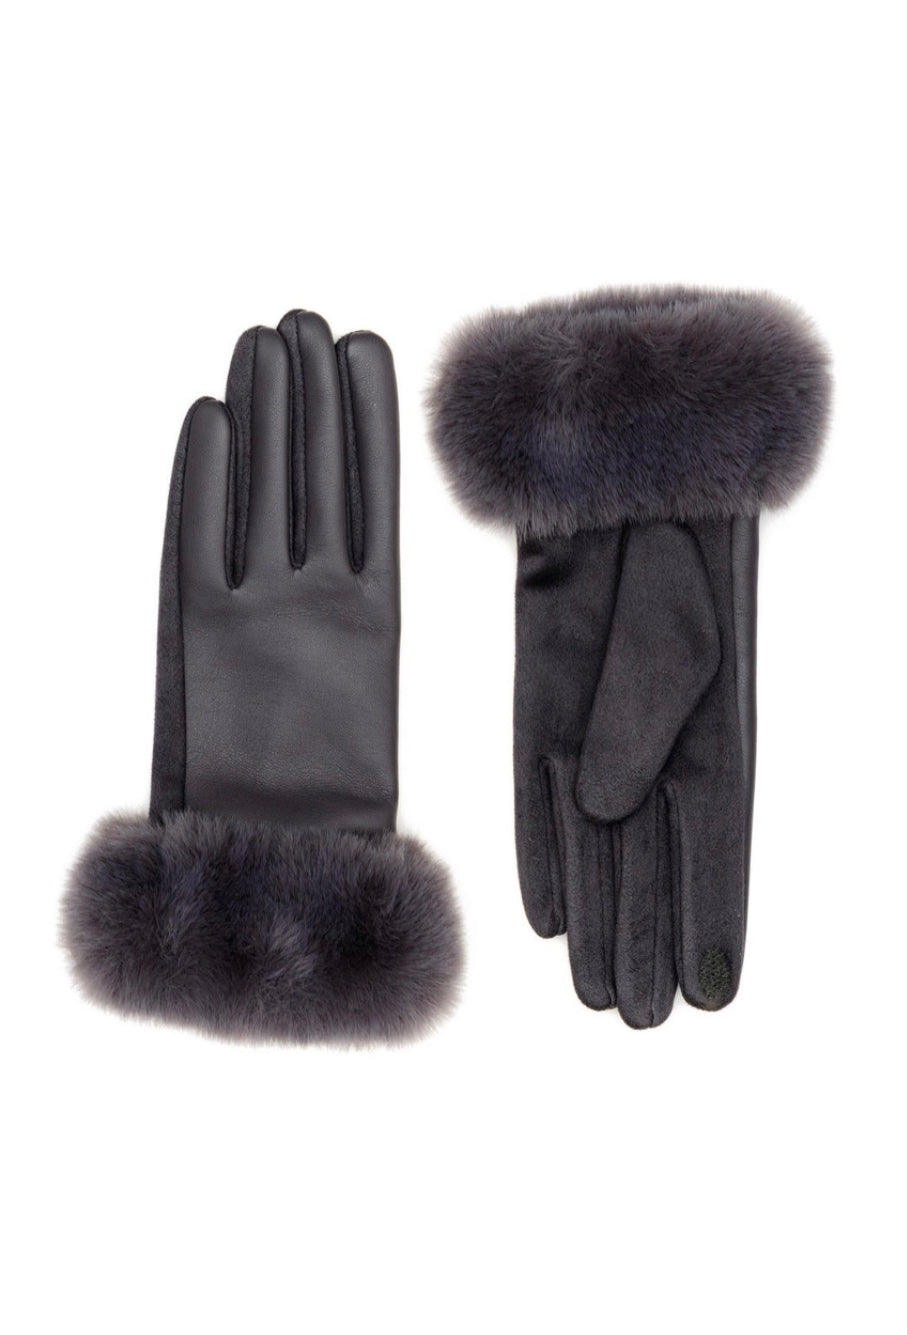 Vegan Leather and Suede Fur Trimmed Gloves - SELFTRITSS